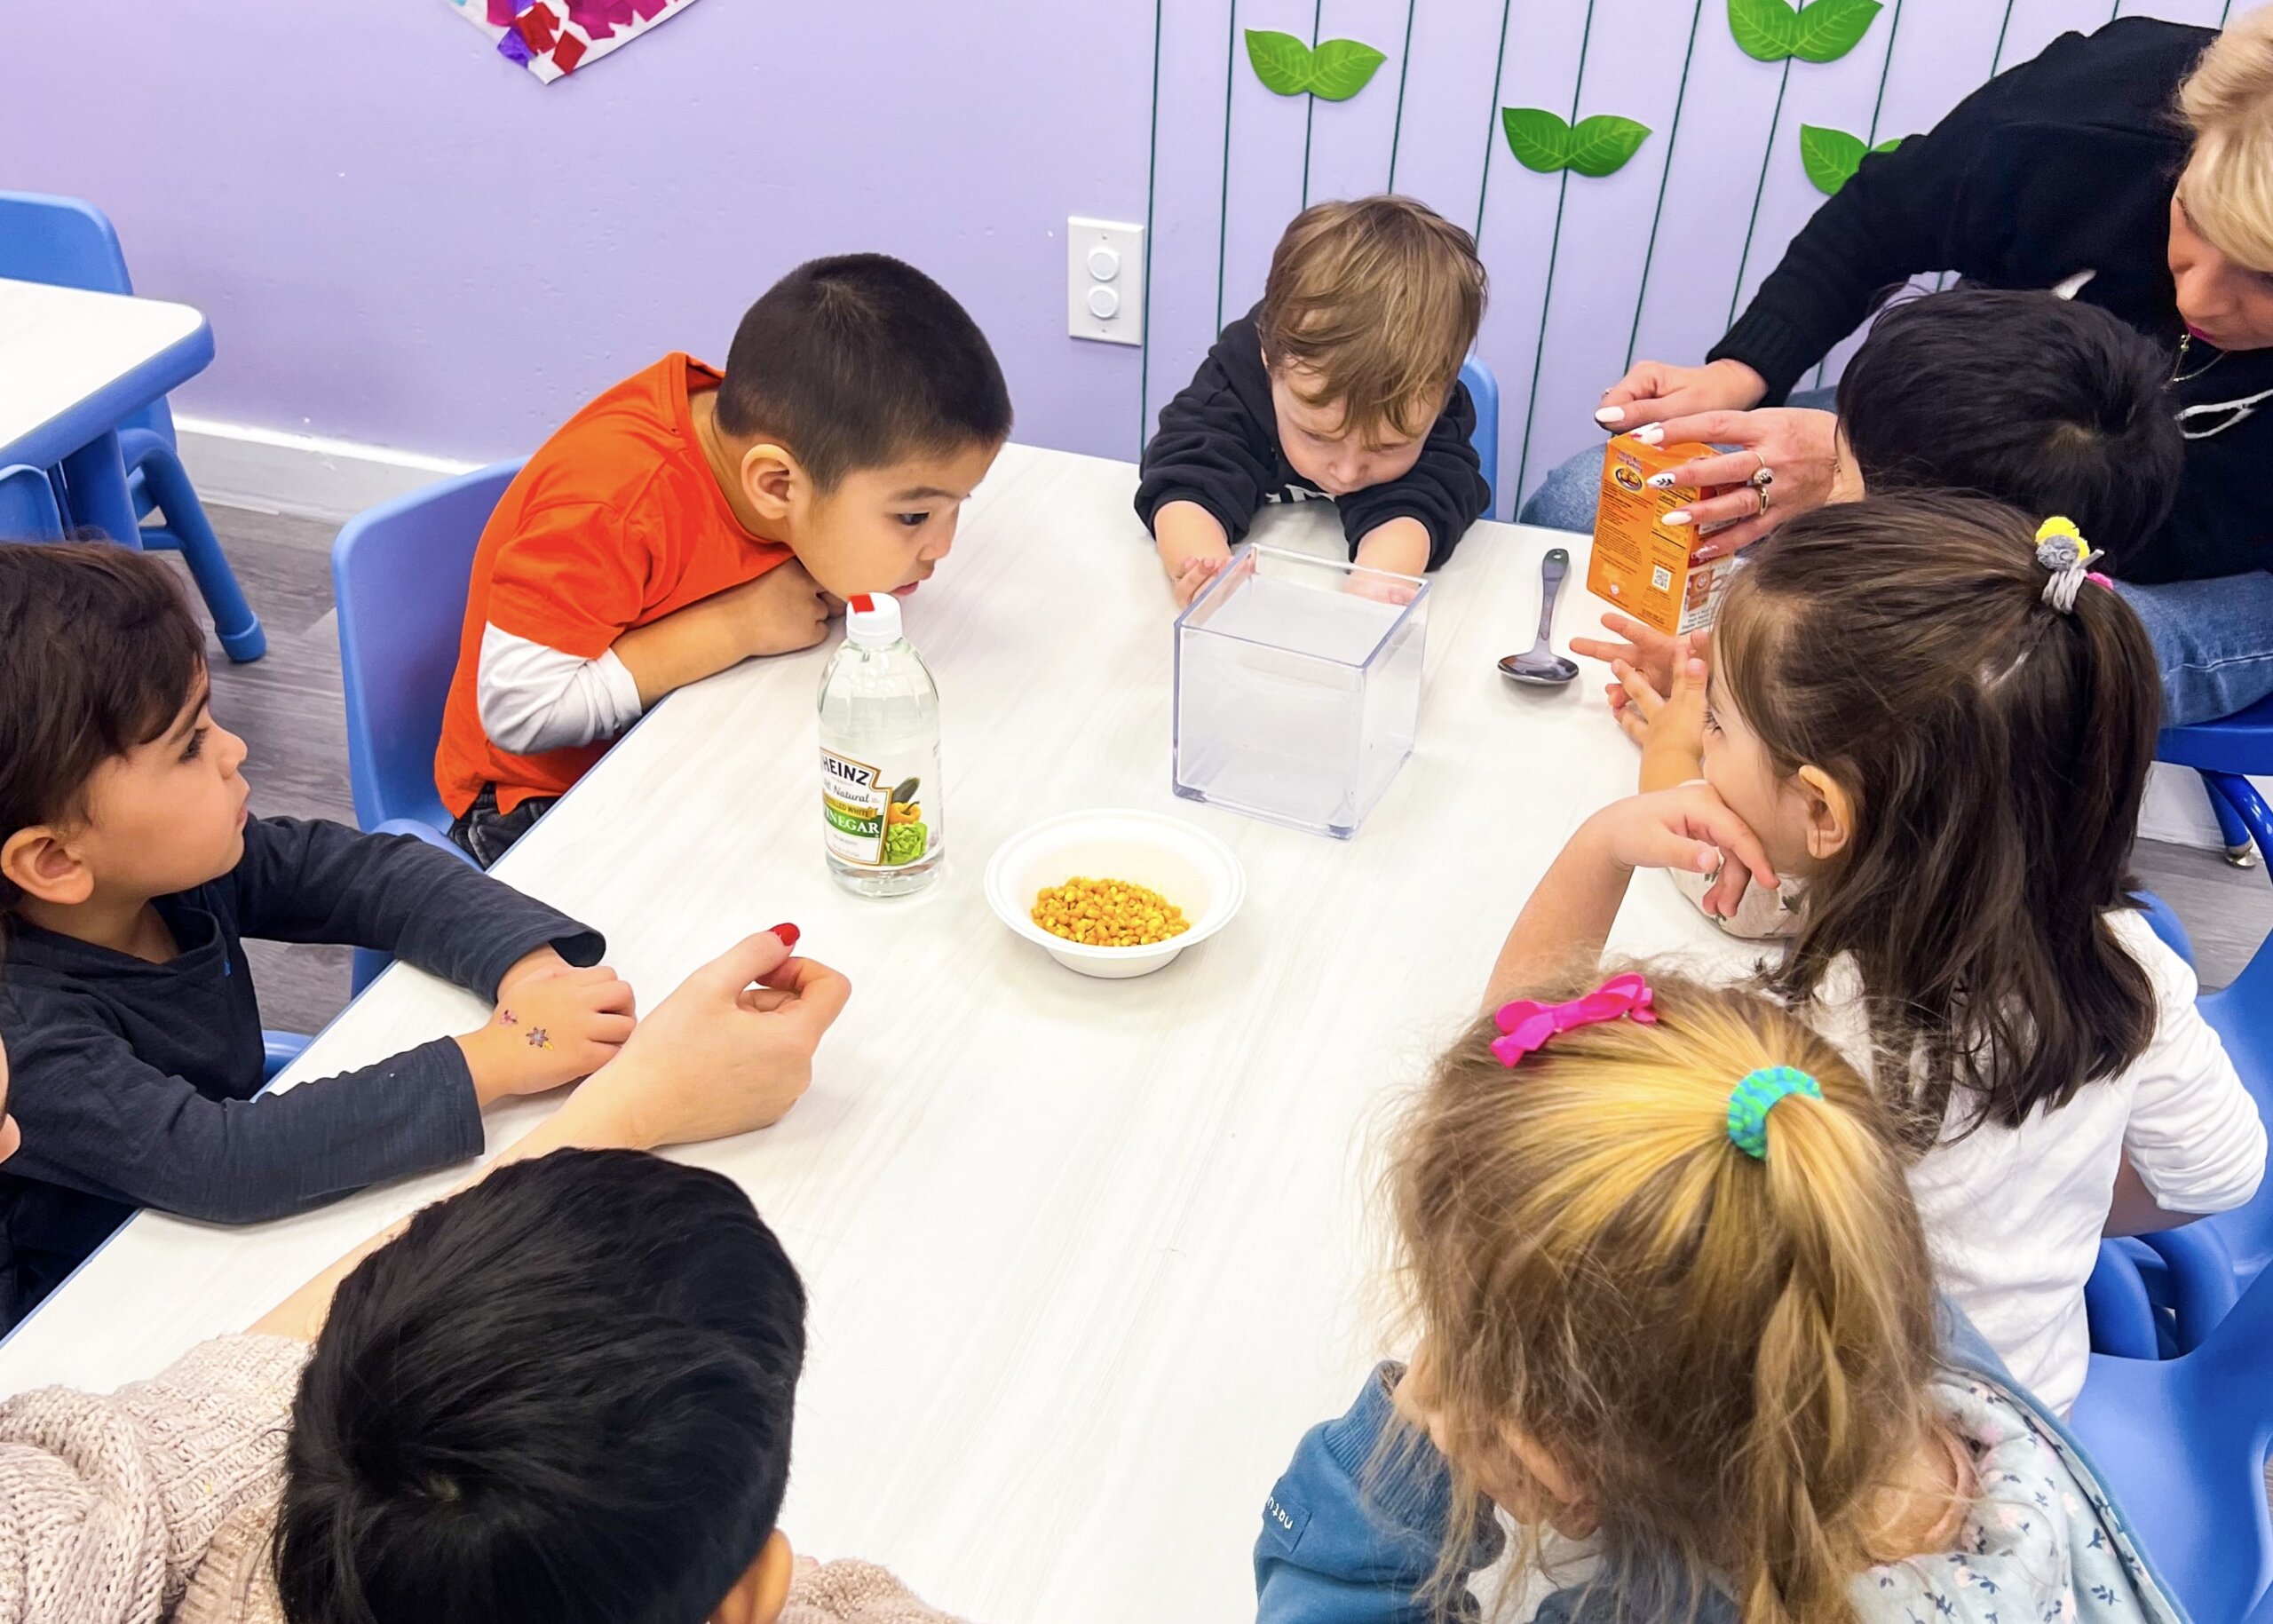 Preschool children attentively watching a vinegar and baking soda experiment at a classroom table